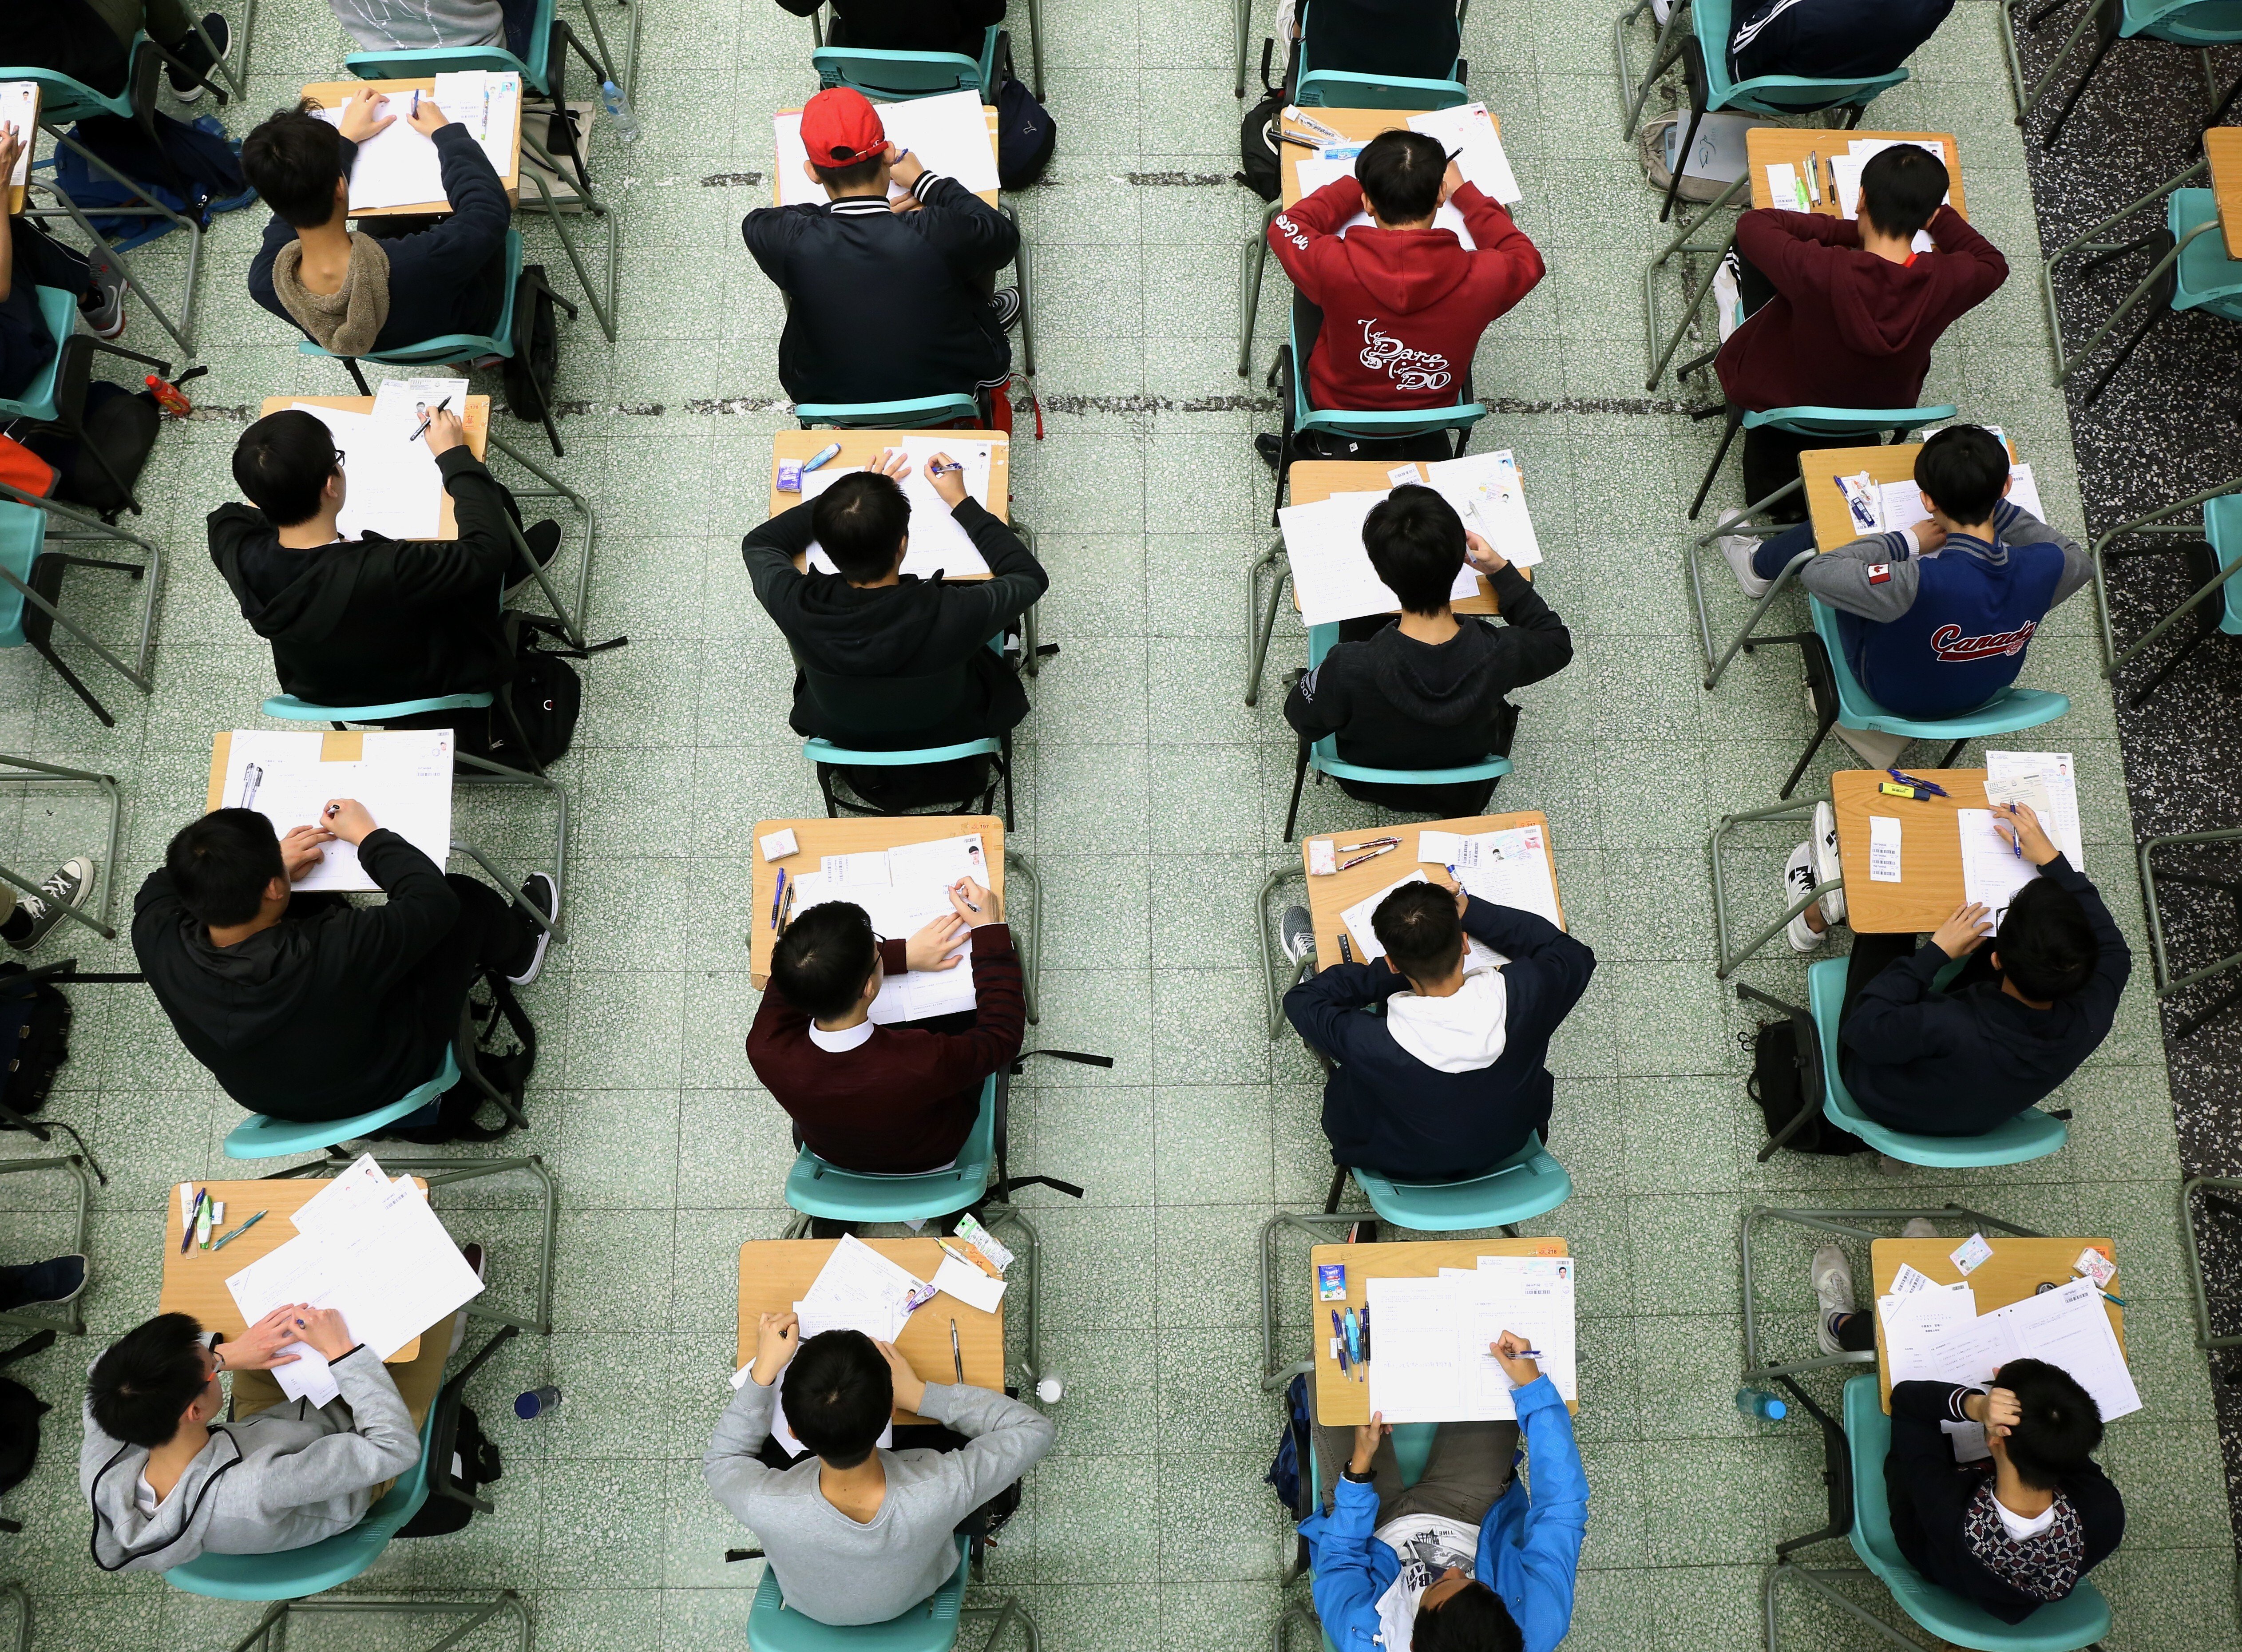 Hong Kong students on the first day of the Diploma of Secondary Education exams at the Cheung Sha Wan Catholic Secondary School last year. Exams in Hong Kong could be cancelled this year if there is a surge in coronavirus cases. Photo: SCMP